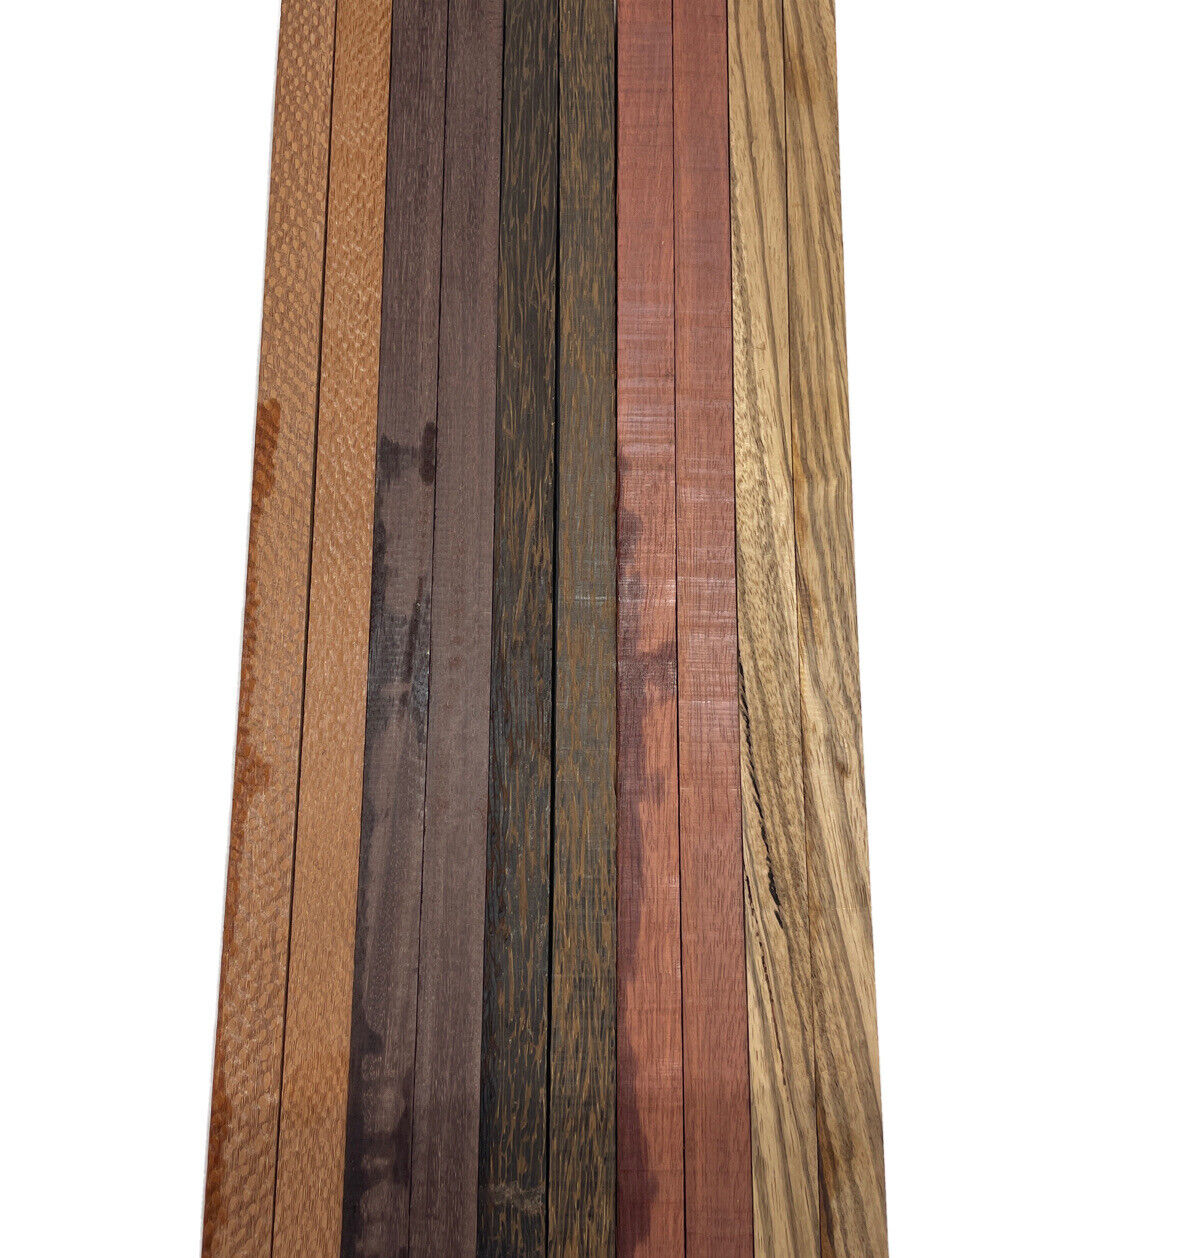 Combo Pack Of 10, 5 Species, Cutting Boards/Thin Dimensional Lumber (Katalox,Leopardwood,Black Palm,Bloodwood,Zebrawood ) - Exotic Wood Zone - Buy online Across USA 